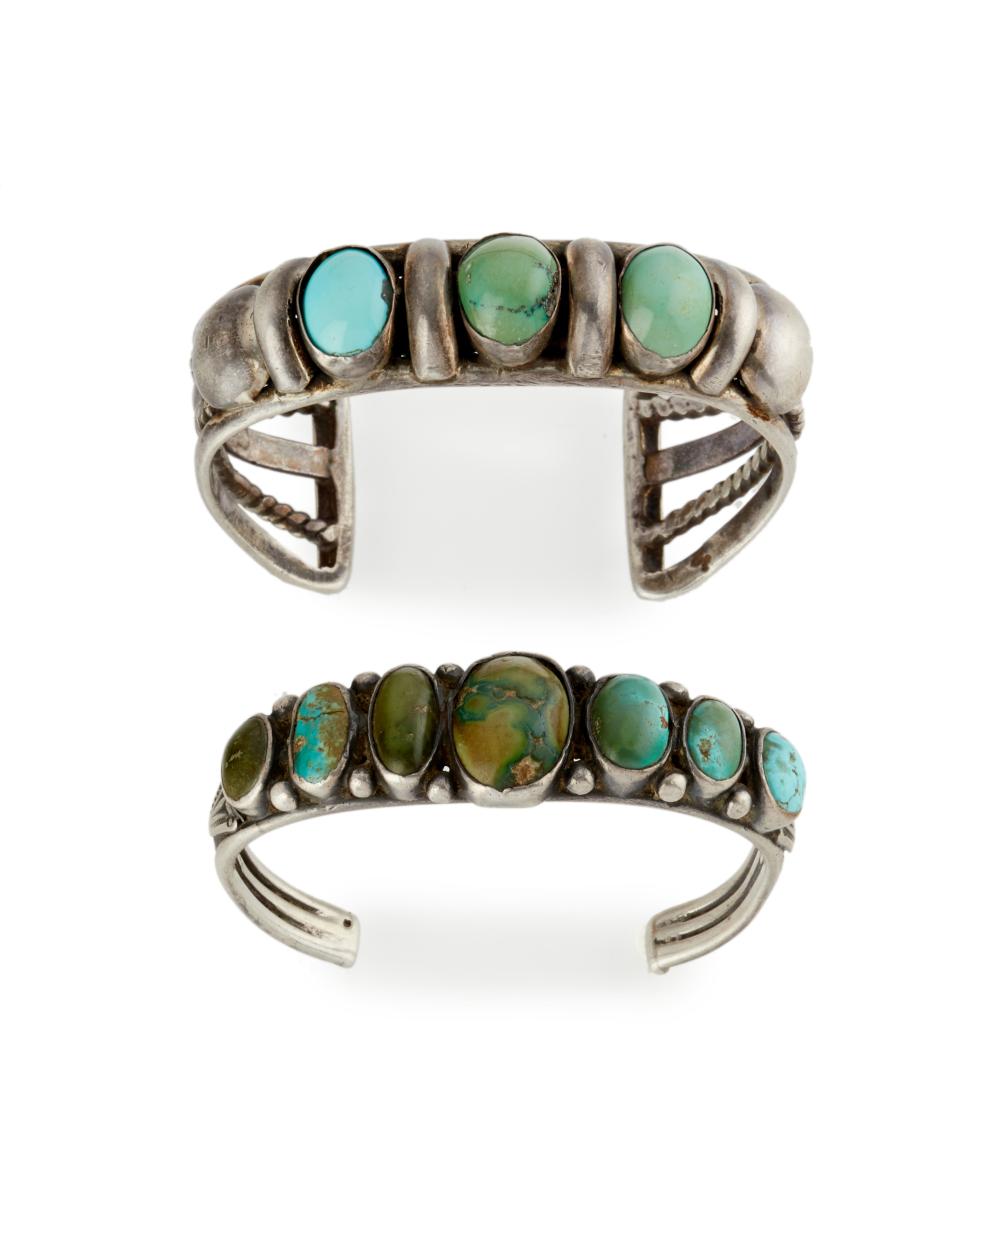 TWO SILVER AND TURQUOISE BRACELETSTwo 34302a